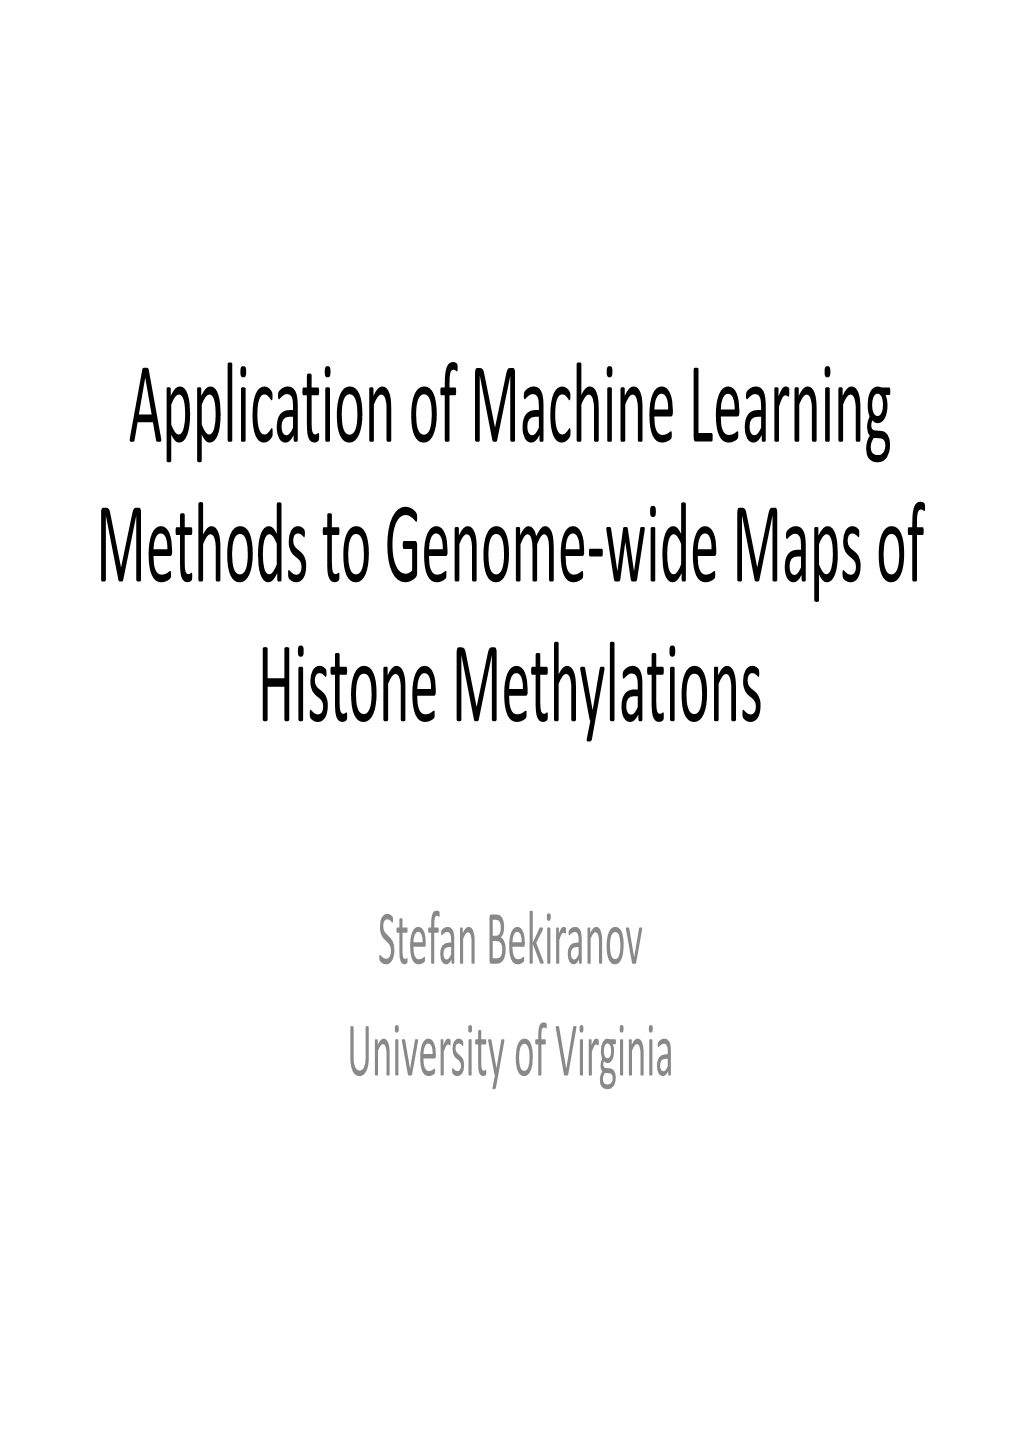 Application of Machine Learning Methods to Genome-Wide Maps of Histone Methylations